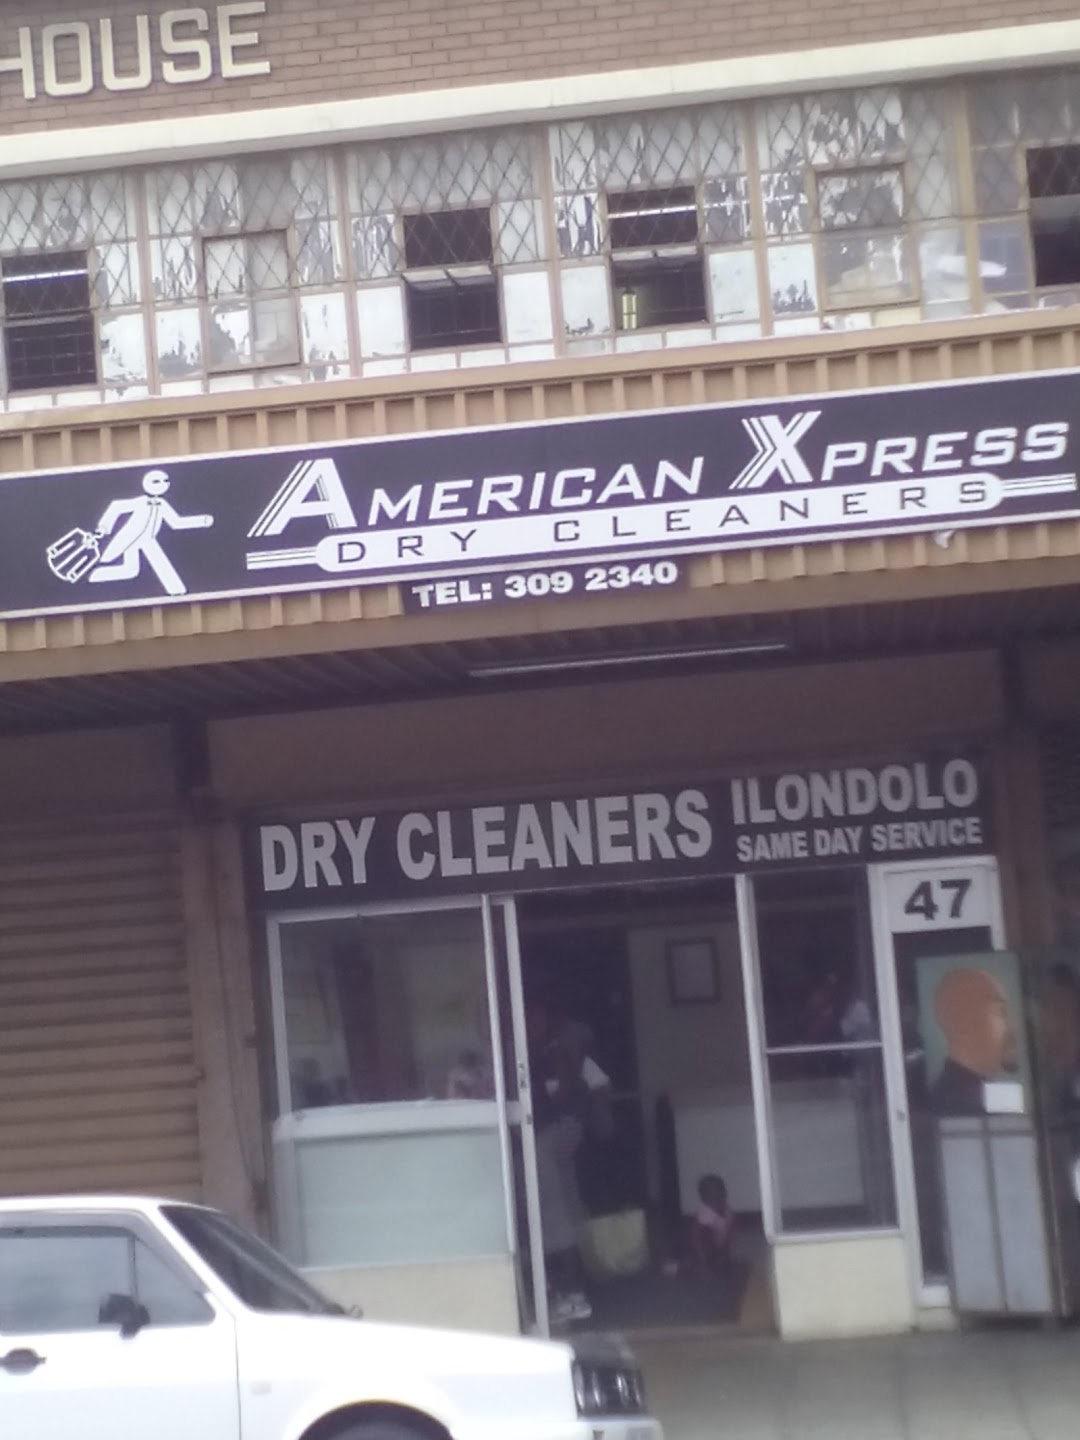 American Xpress Dry Cleaners